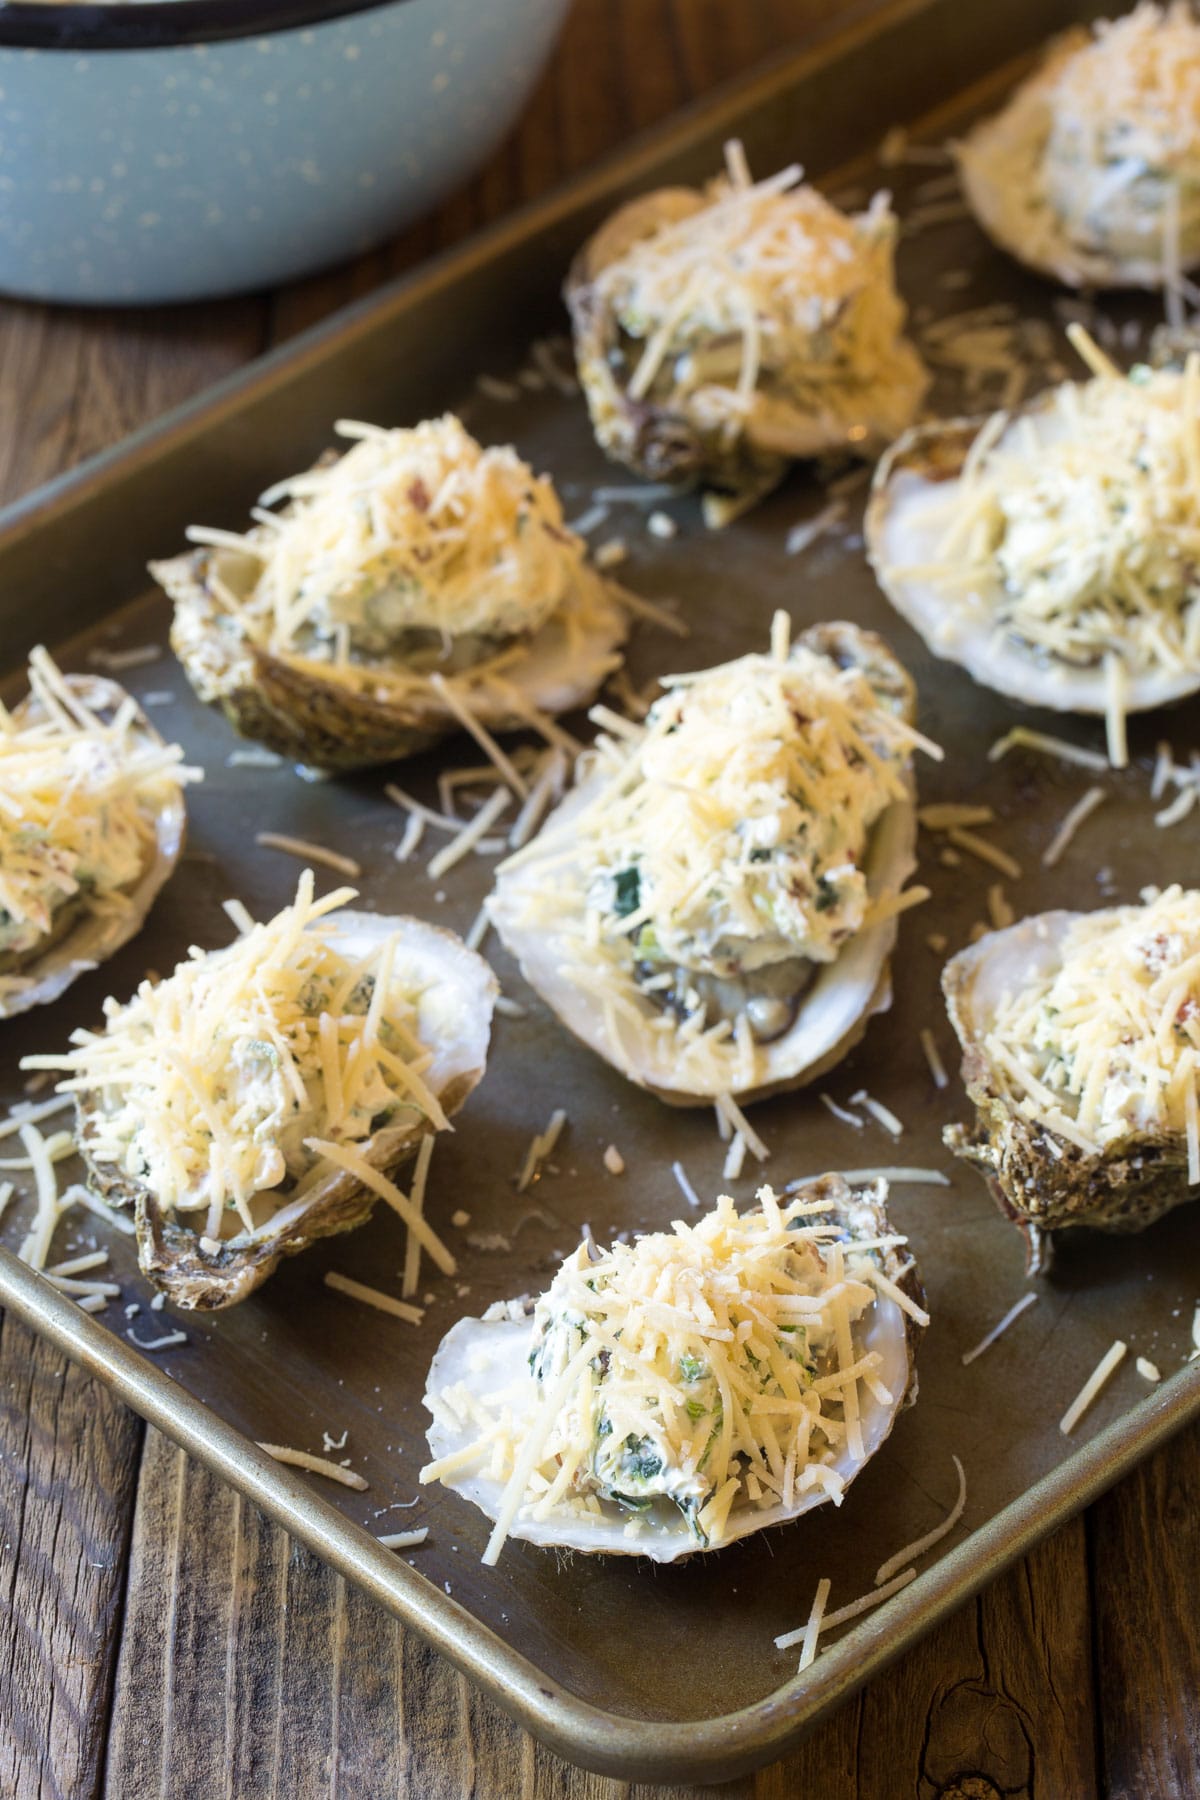 Making Three-Cheese Baked Oysters Recipe (In The Shell!) #ASpicyPerspective #holiday #newyears #christmas